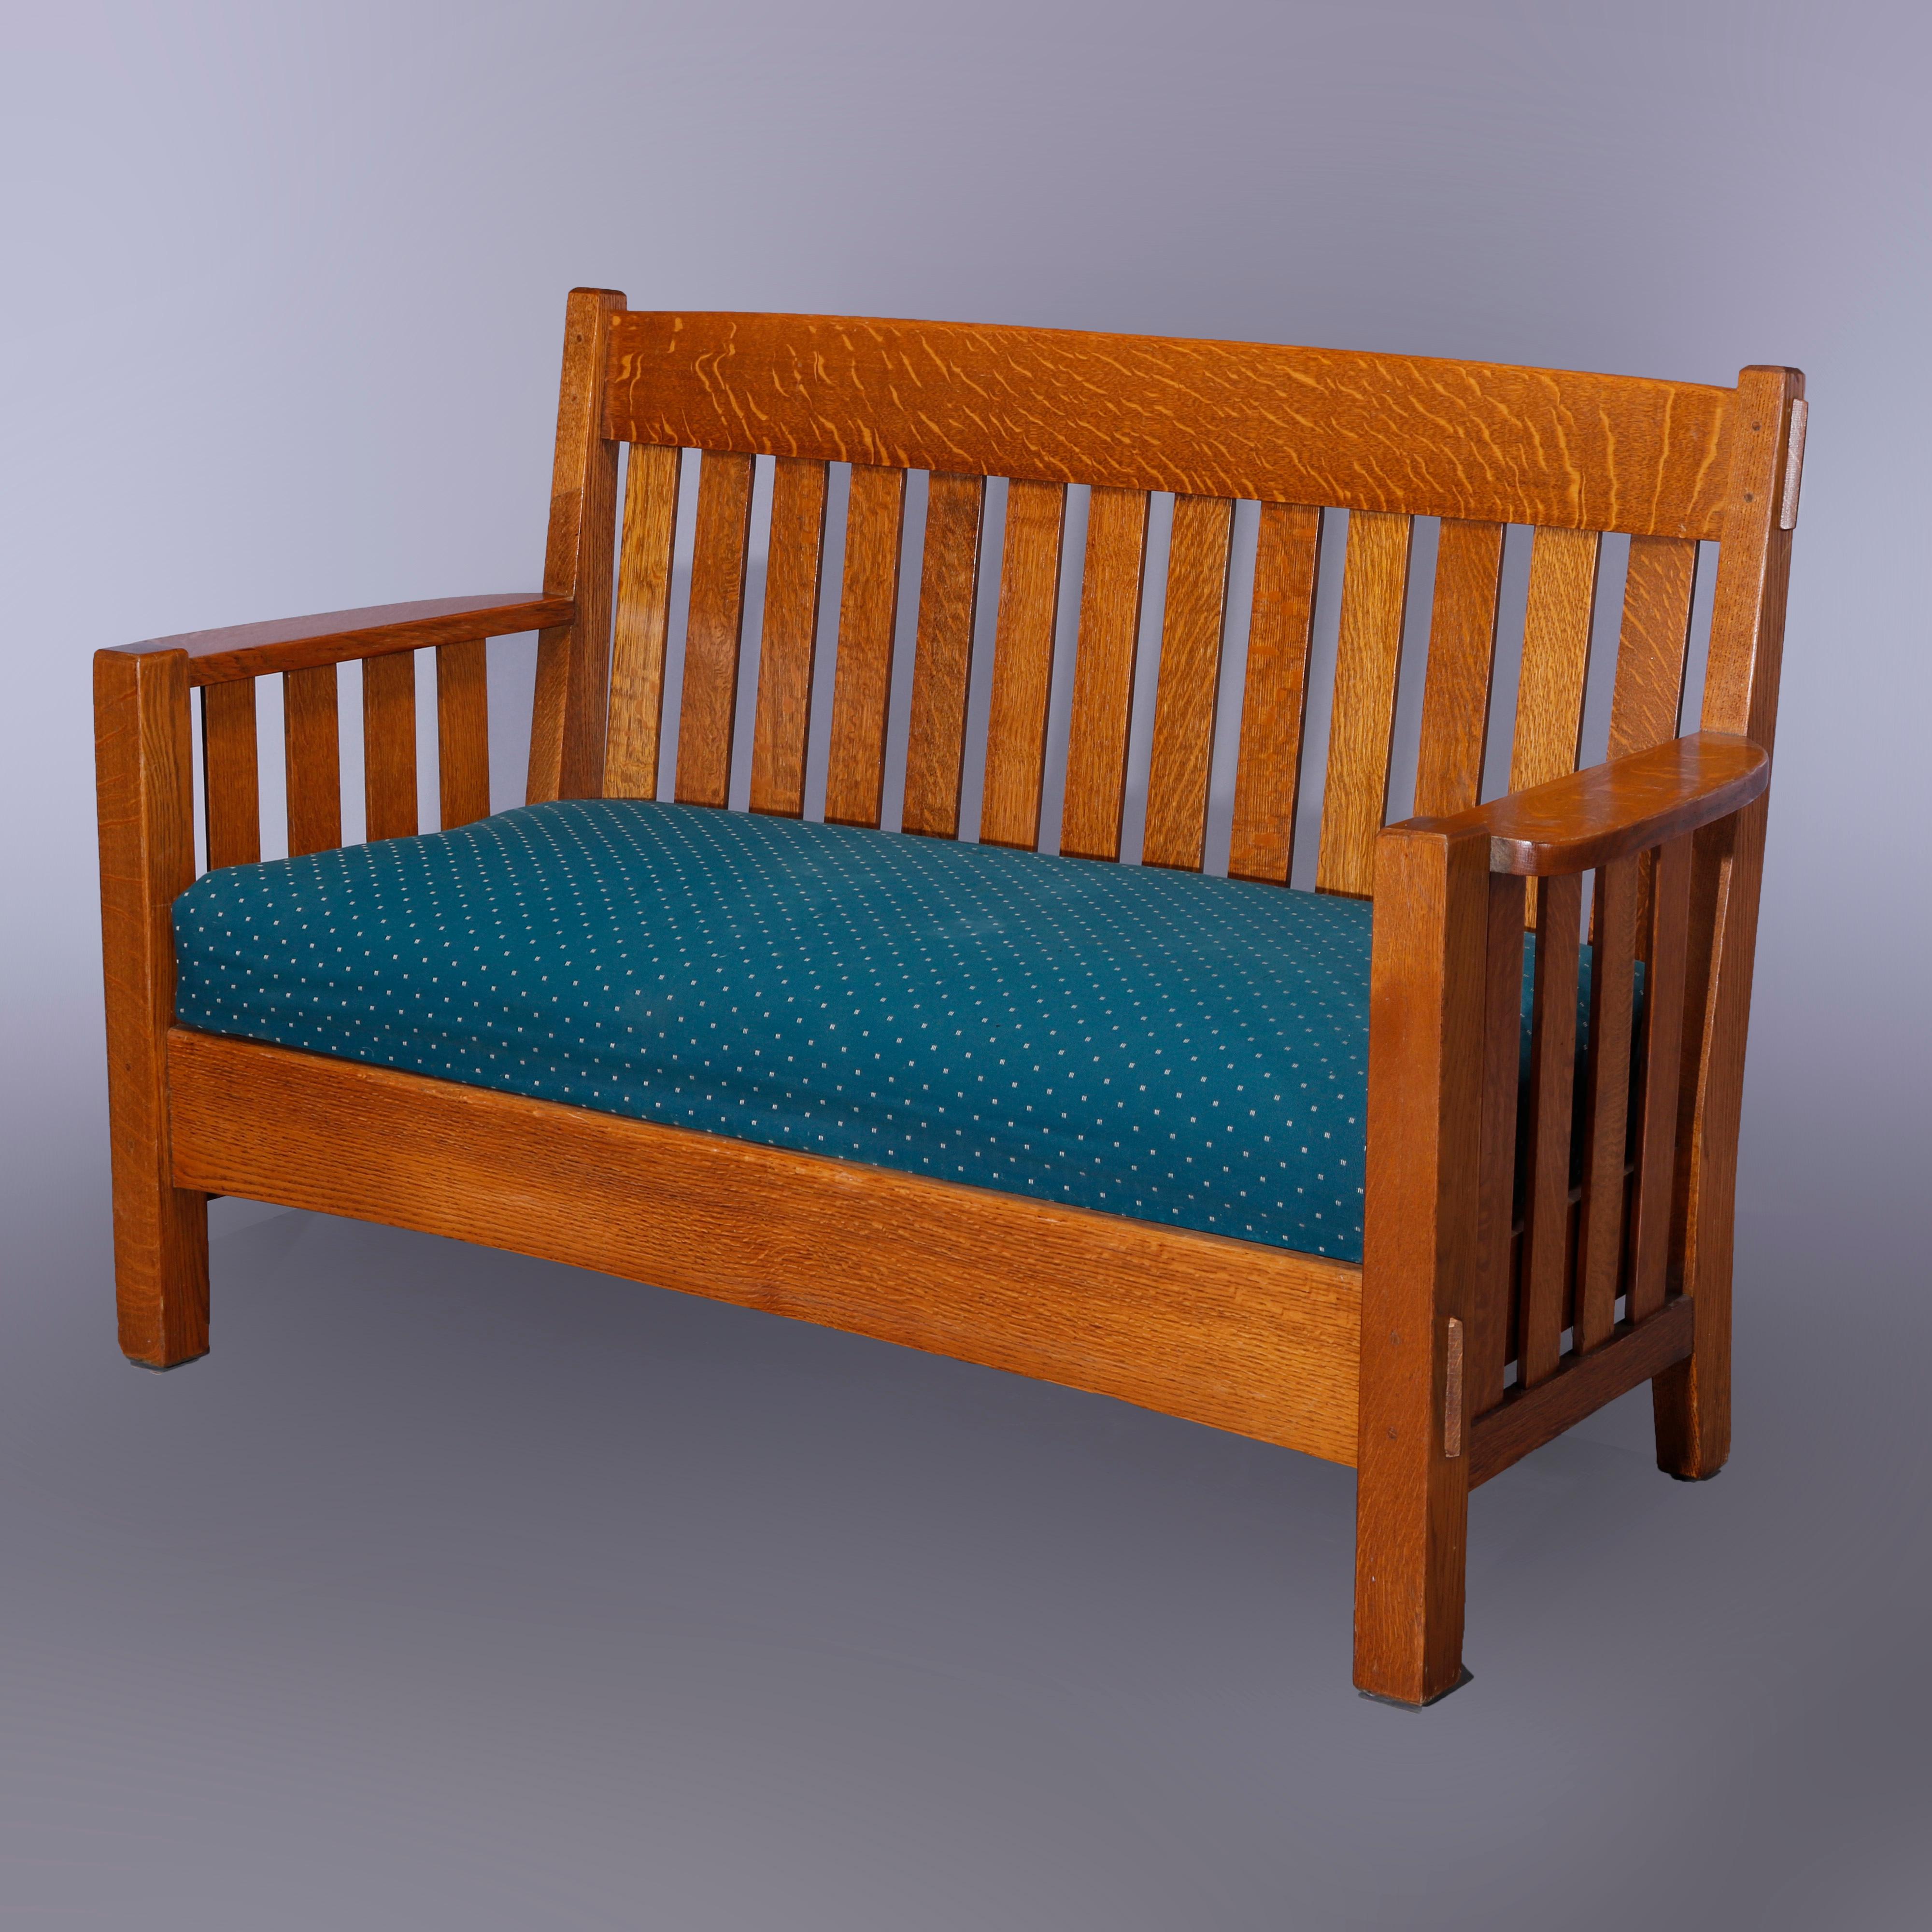 An antique Arts and Crafts Harden Mission oak settee offers slat back and sides with cushion seat, c1910

Measures - 38.25'' H x 60.5'' W x 26'' D.
   